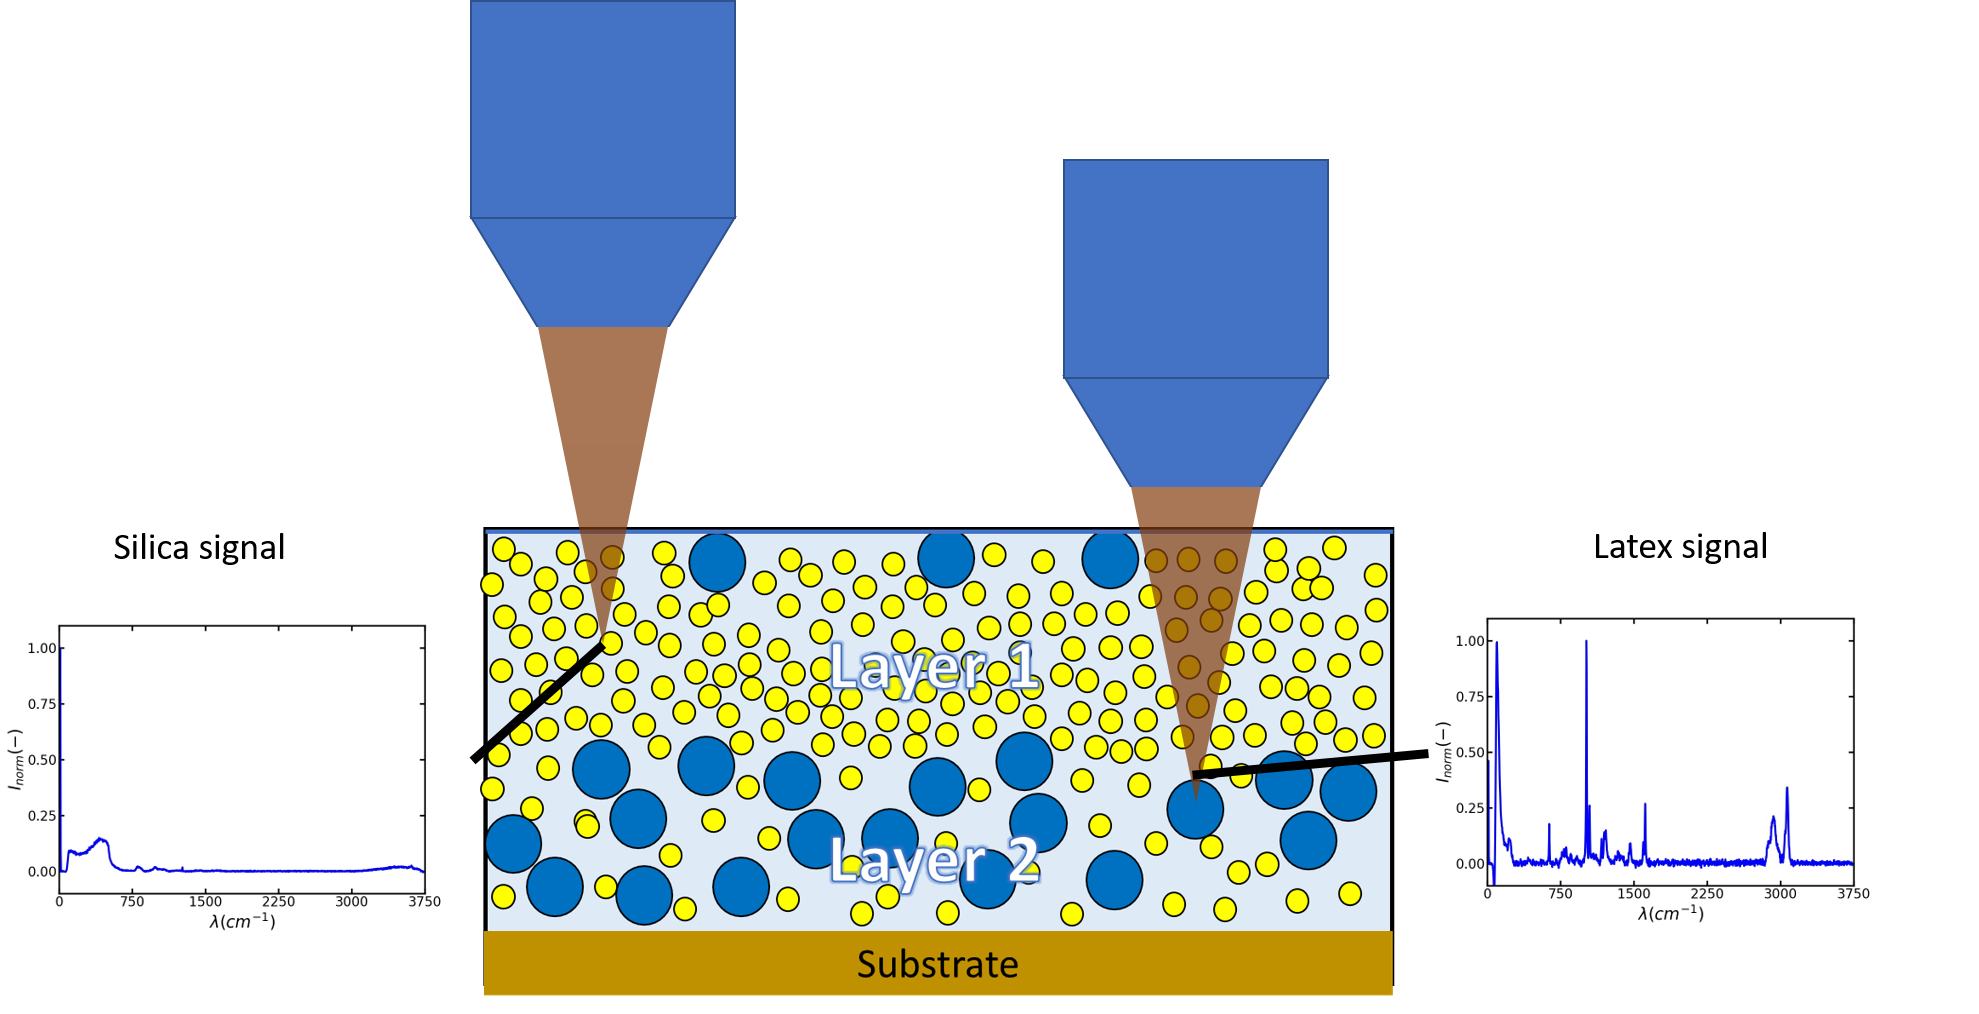 Schematic of Raman measurements in a dried silica latex mixture. The silica and the latex gives different Raman signals. Using the ratio between these signals we can determine the relative amount of both at different depths inside the film.